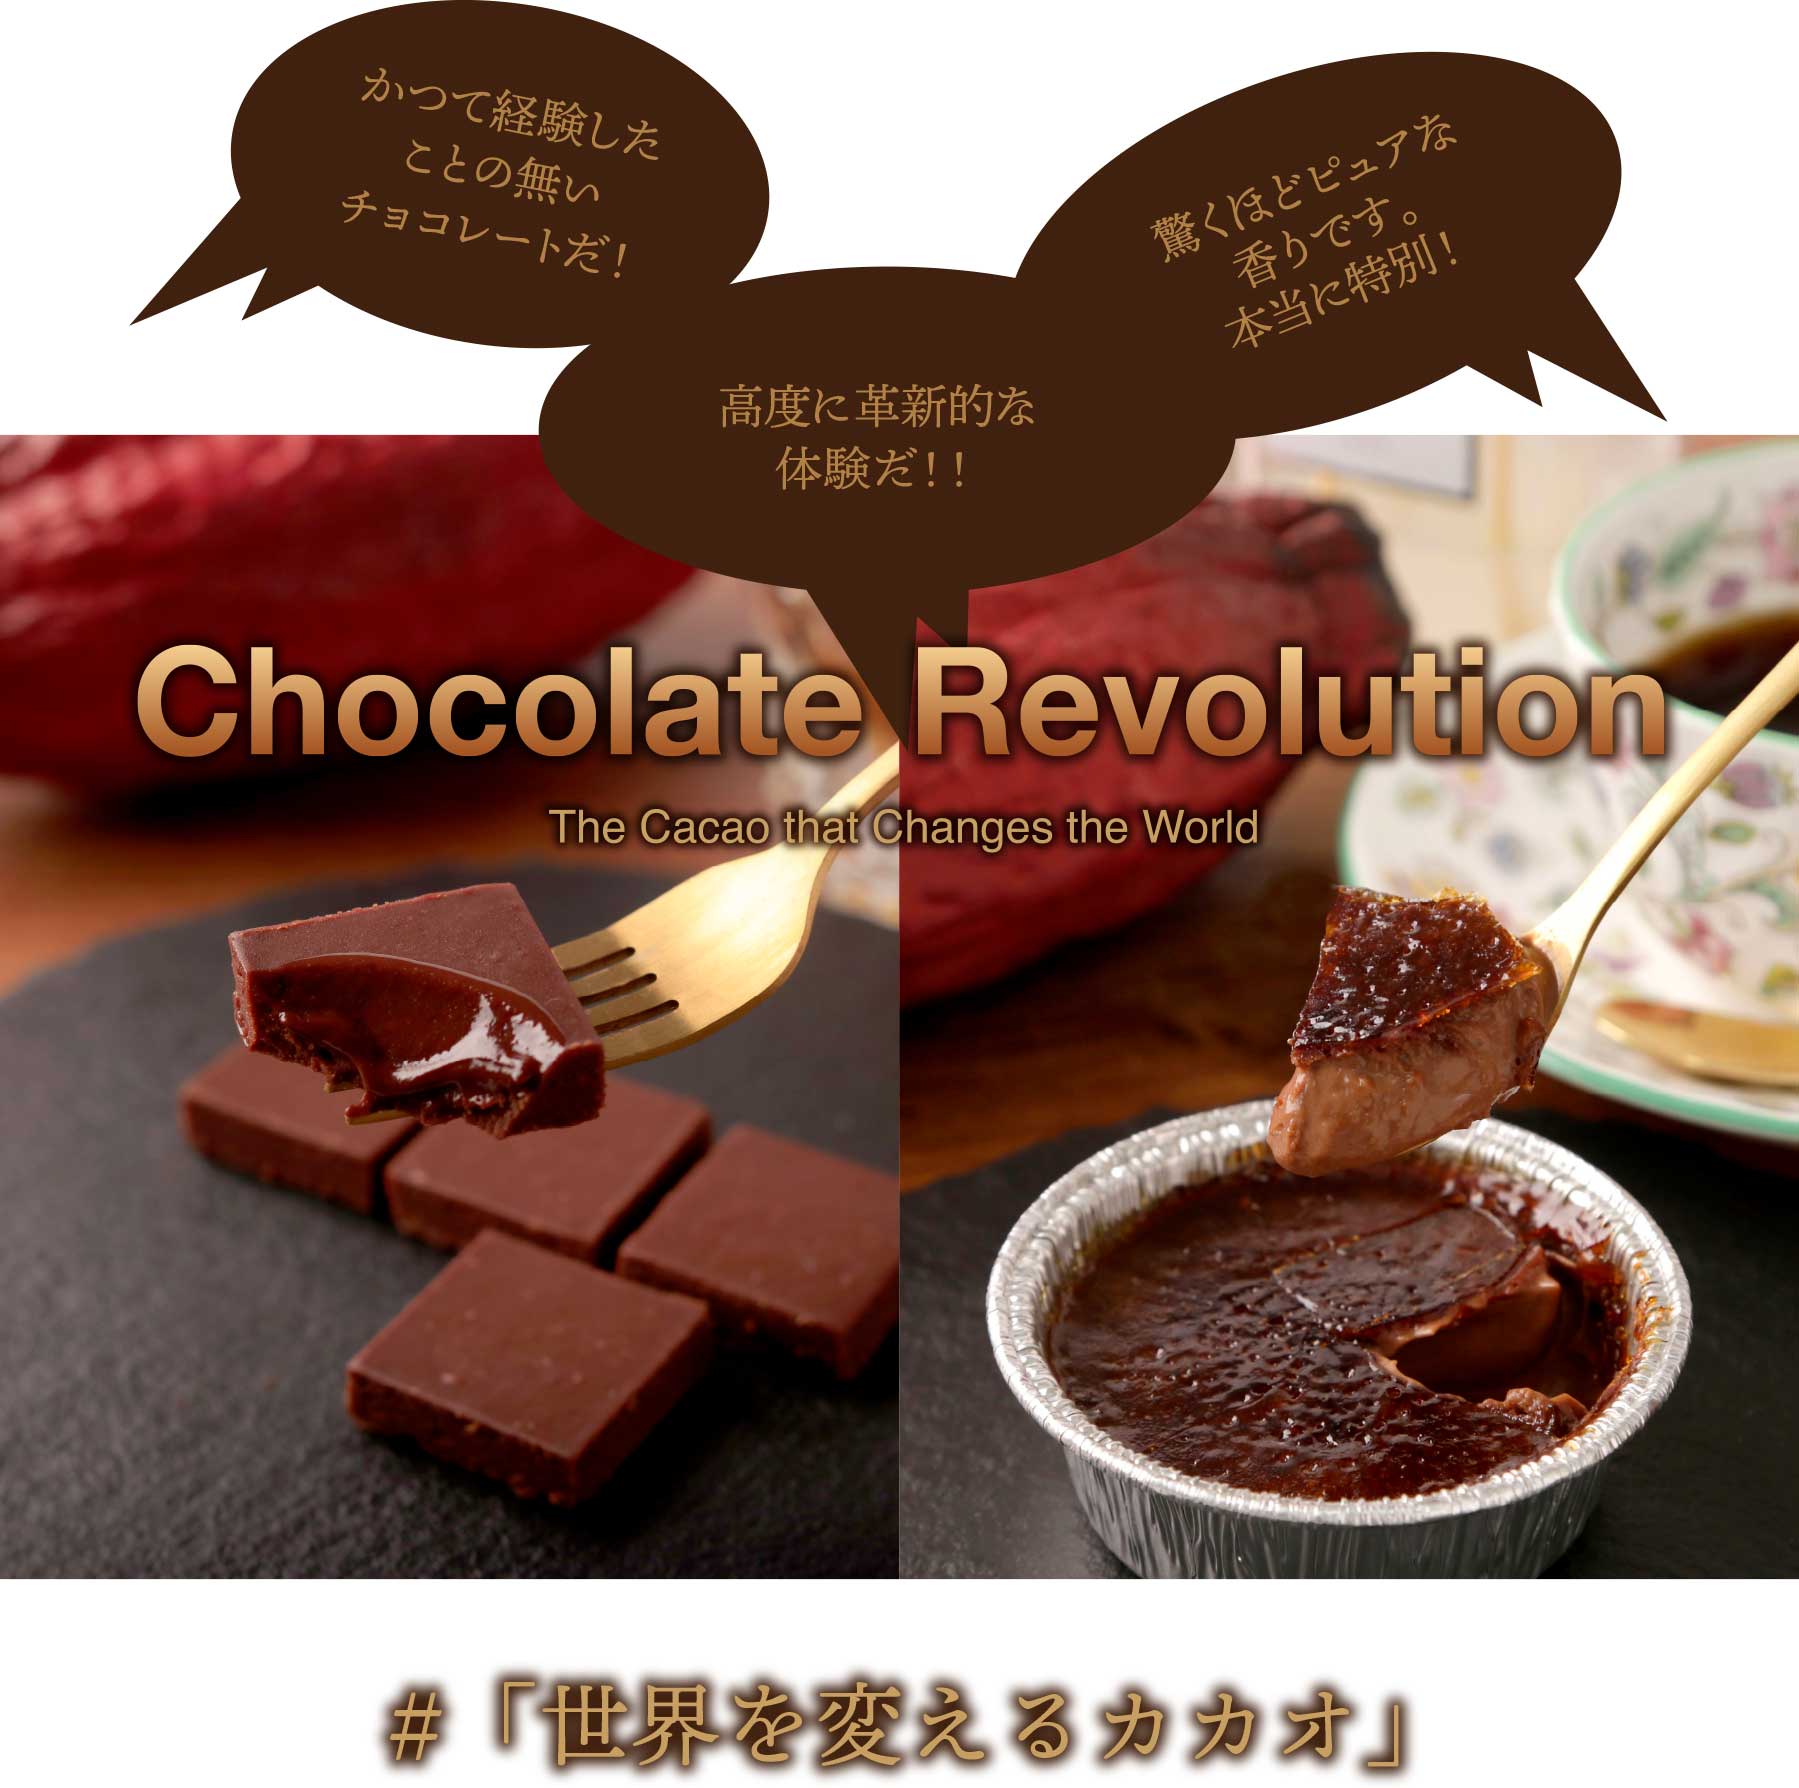 Chocolate Revolution The Cacao that Changes the World #「世界を変えるカカオ」大好評！につき追加販売いたします。